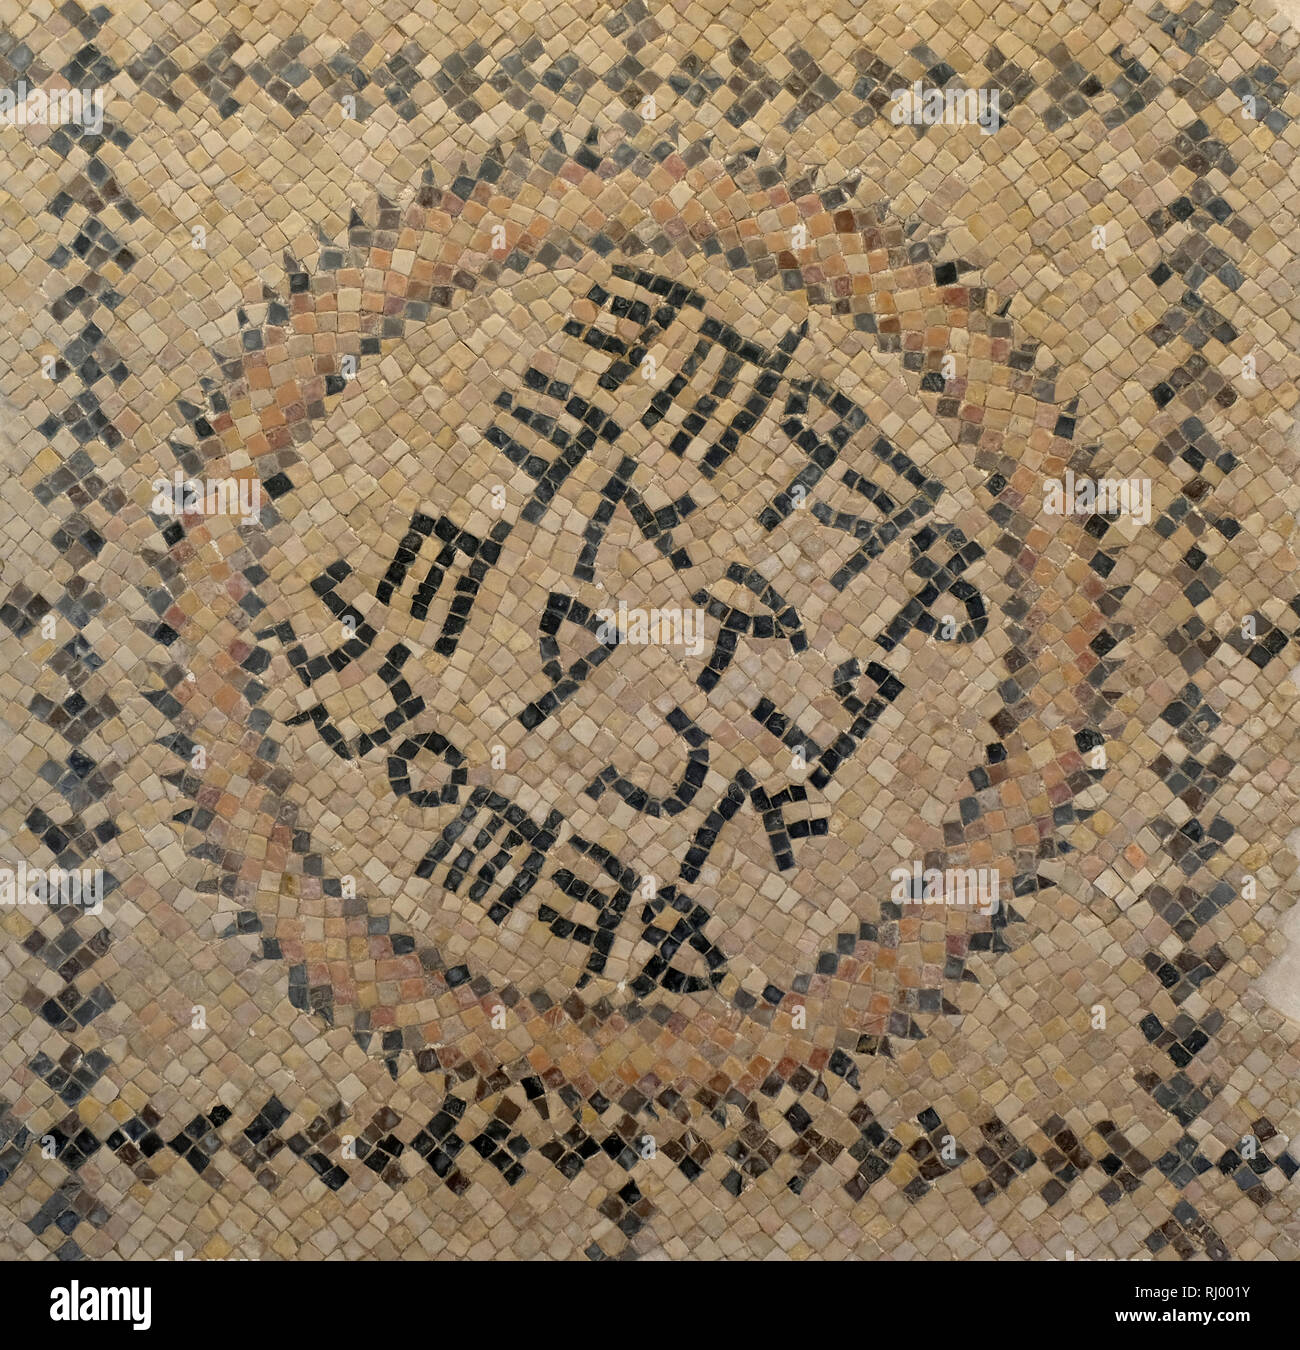 Section of a Byzantine-period (6th century) CE mosaic floor found in a side room of the northern synagogue complex in Beit Shean. The inscription, in Greek transliterated into Samaritan characters, reads: 'God help Afri and Anan.' The use of Samaritan script may indicate that the synagogue was a Samaritan one. Israel Stock Photo